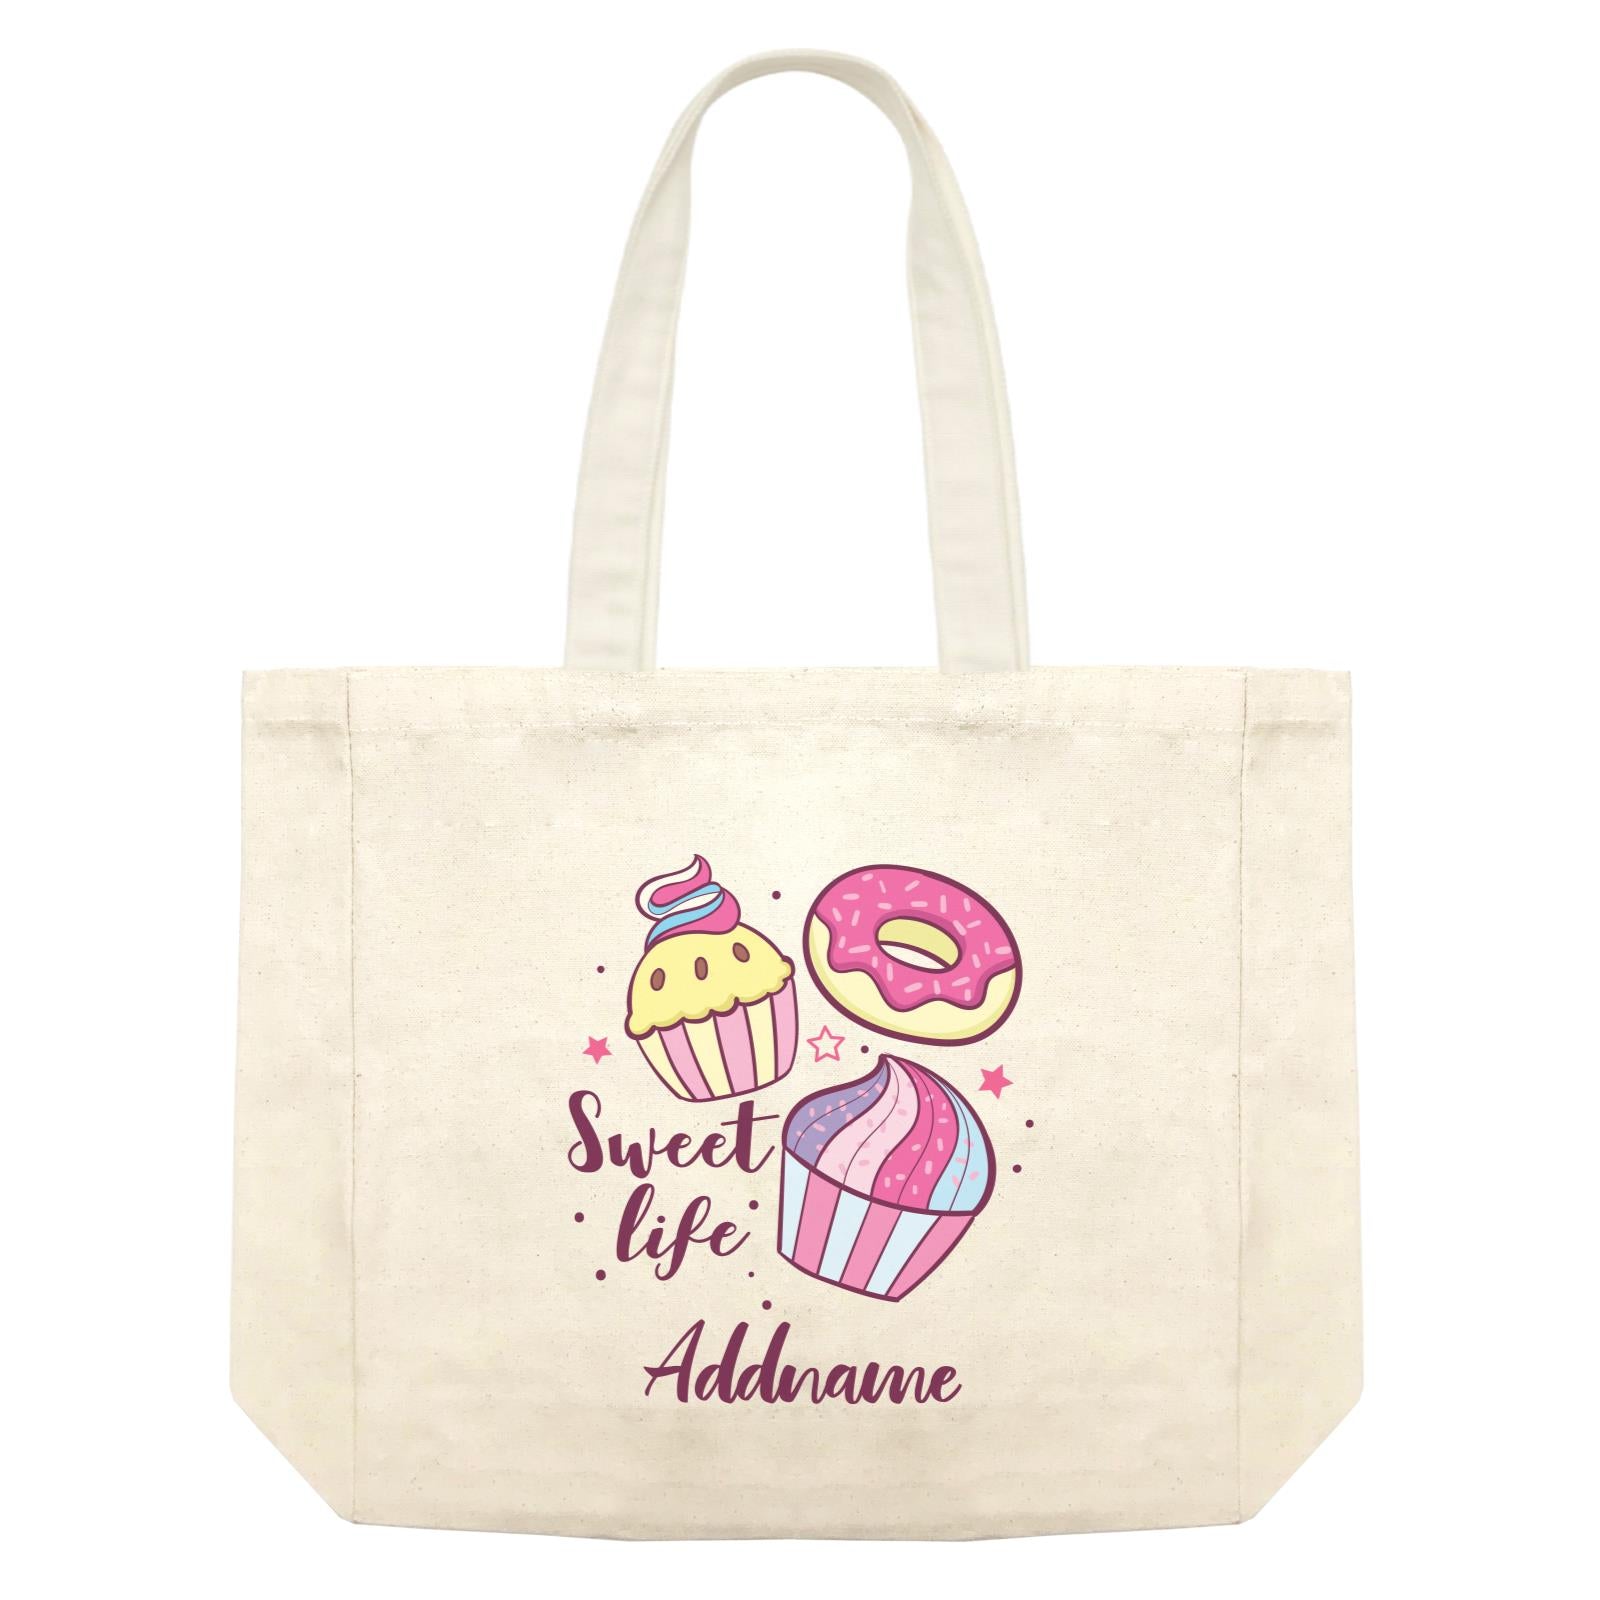 Cool Cute Foods Sweet Life Dessert Addname Shopping Bag